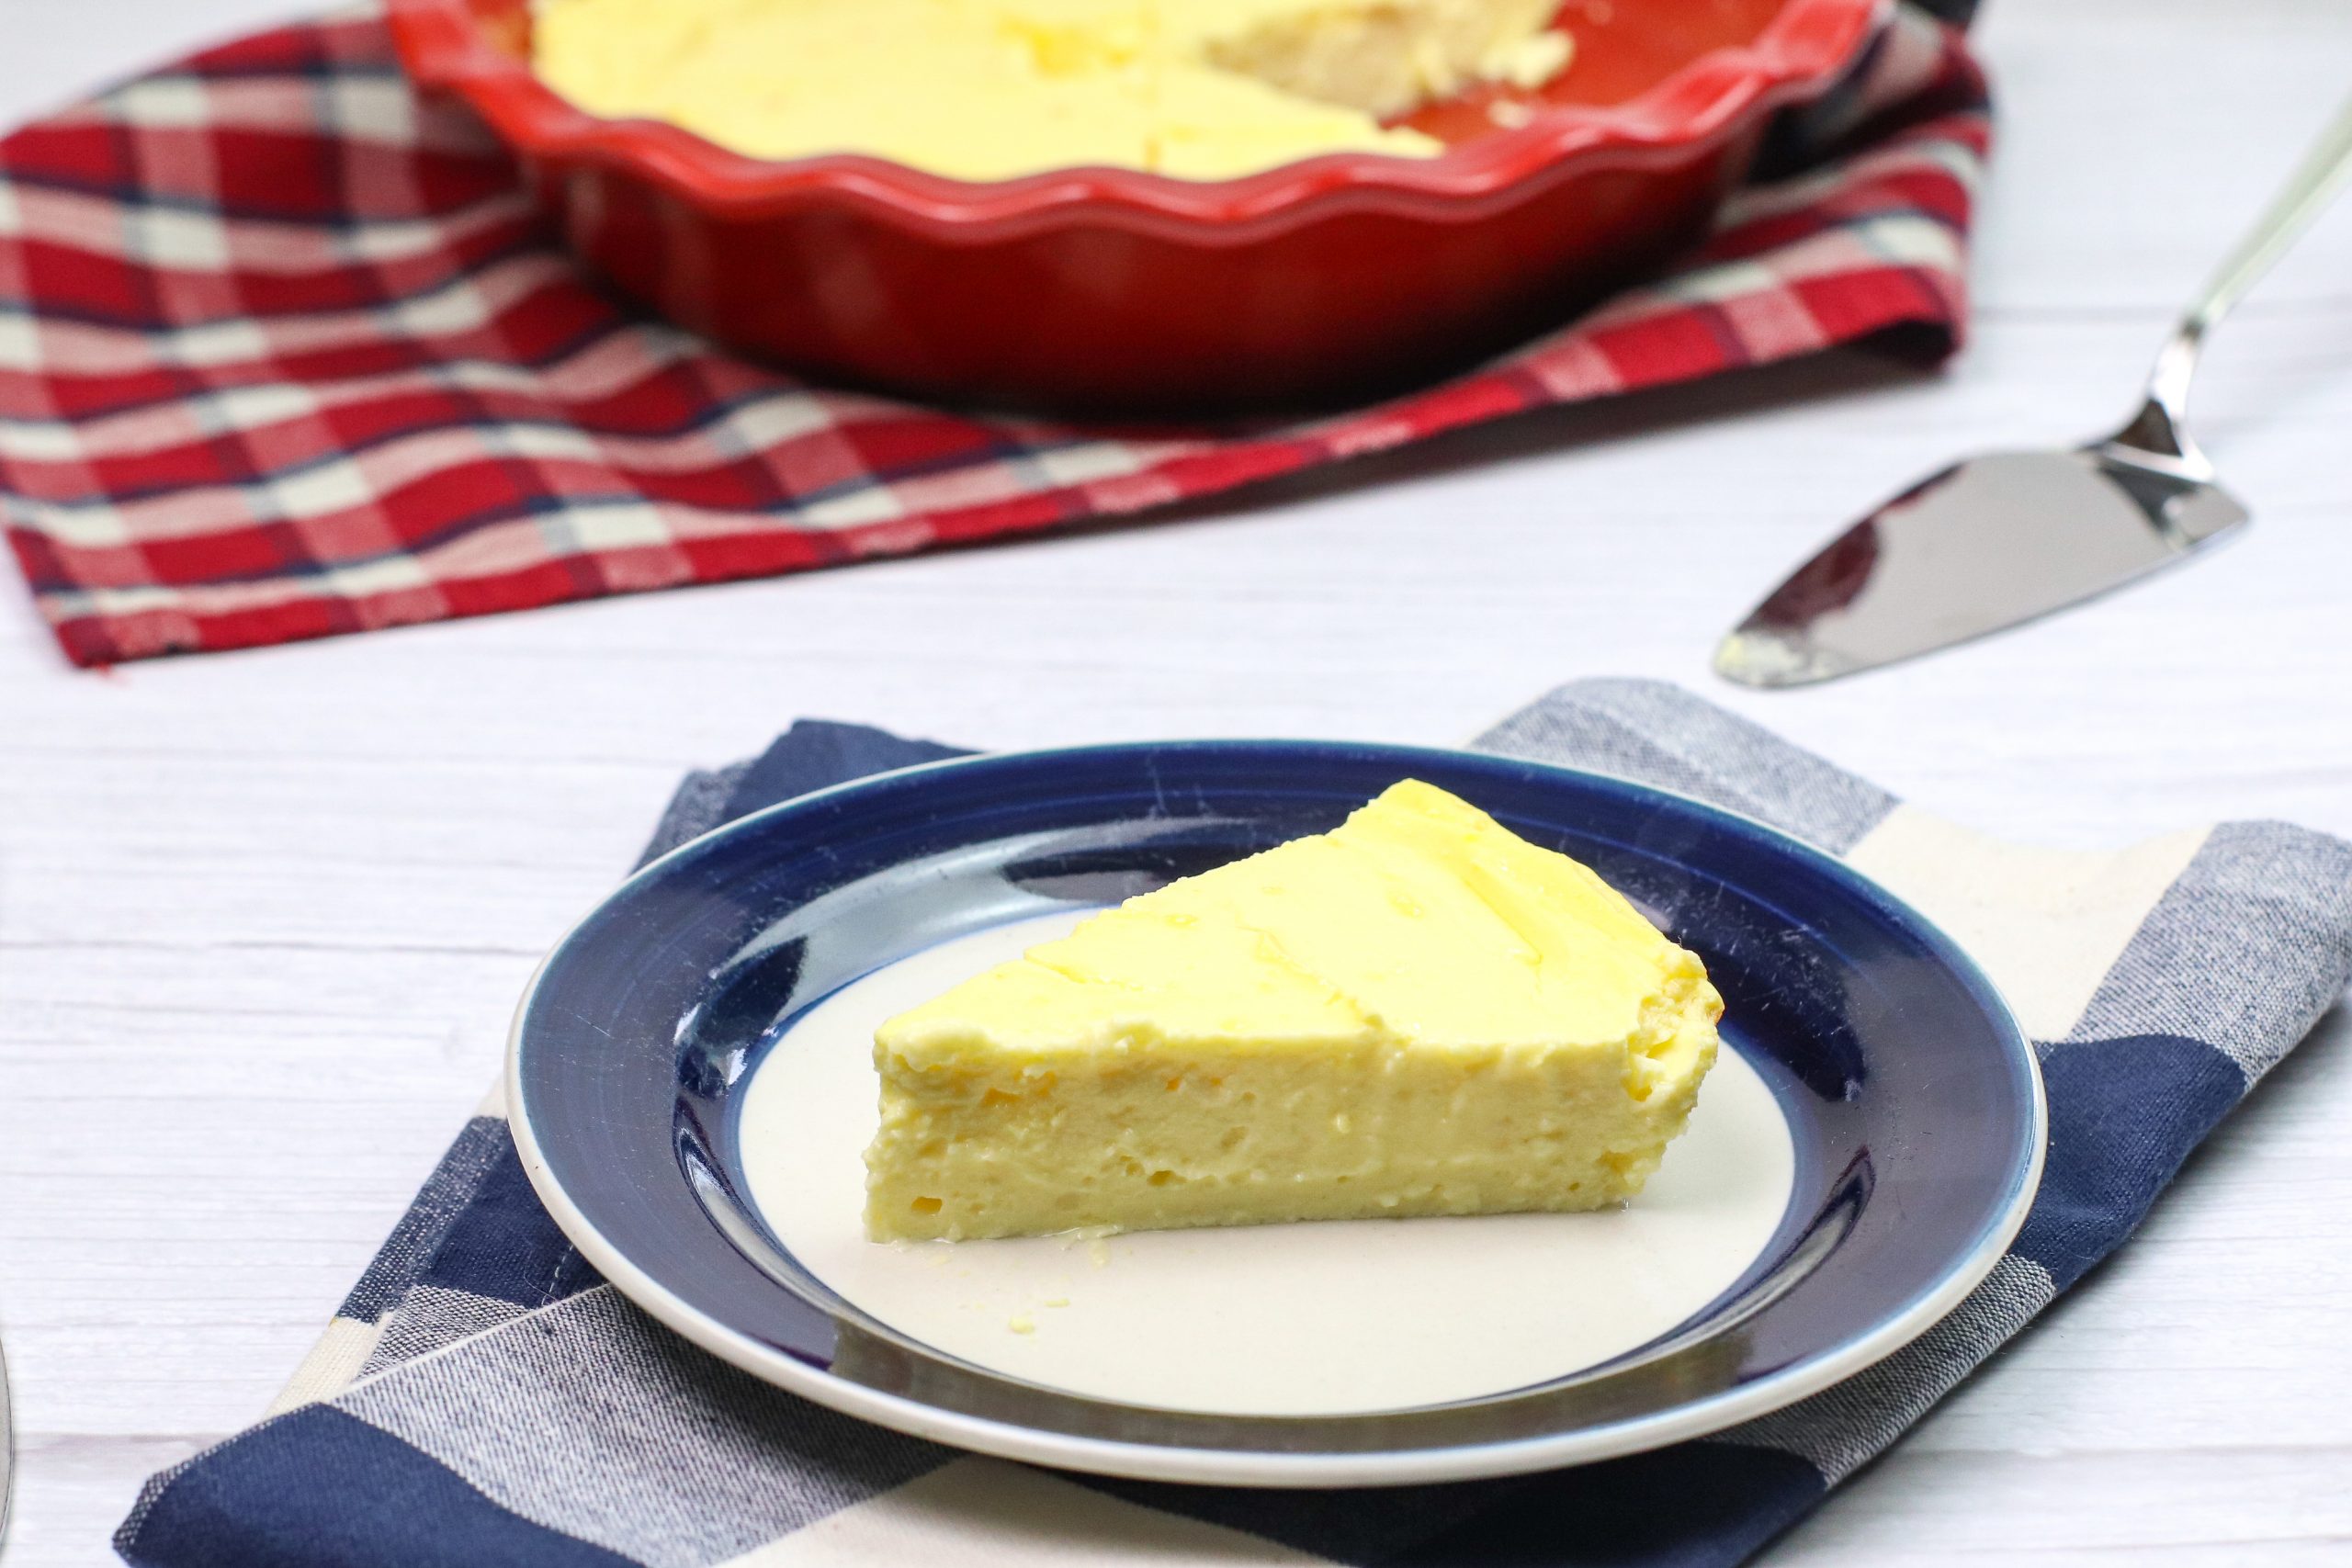 https://ourwabisabilife.com/wp-content/uploads/2019/04/0-point-cheesecake-recipe-8-scaled.jpg